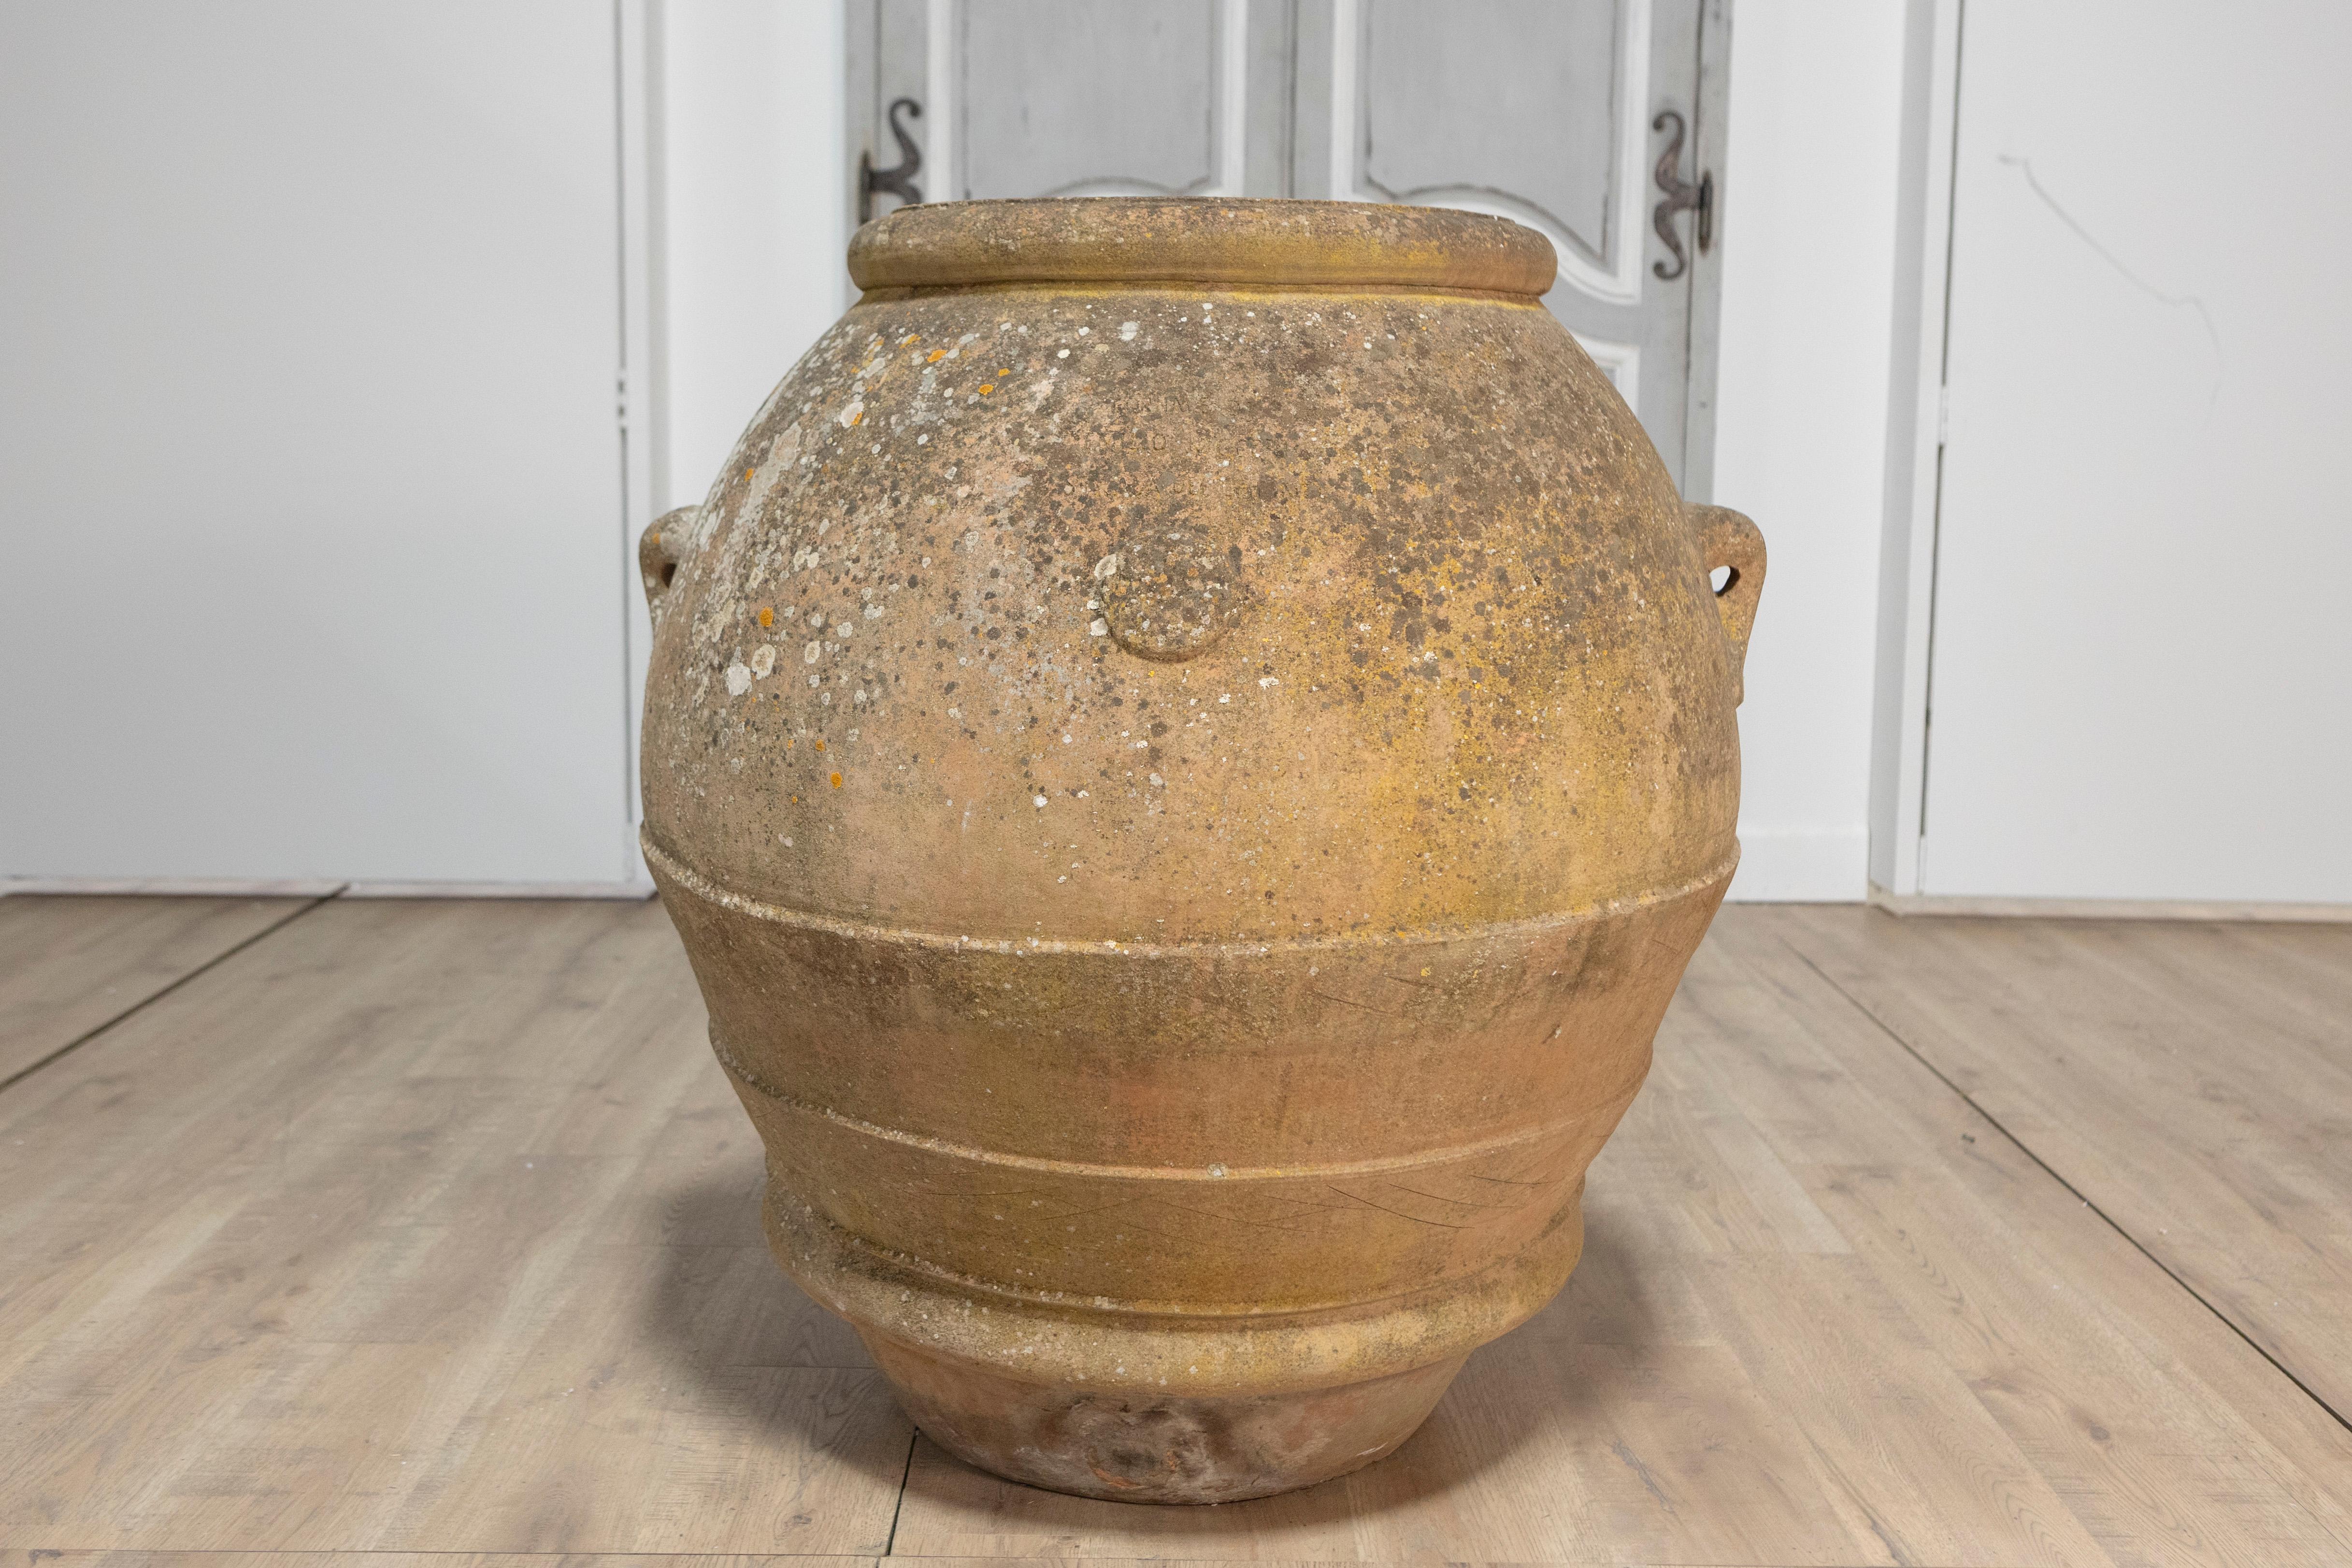 A large Italian terracotta planter from the 19th century with nicely weathered appearance and small lateral handles. This large Italian terracotta planter from the 19th century exudes rustic charm and timeless elegance. With a beautifully weathered